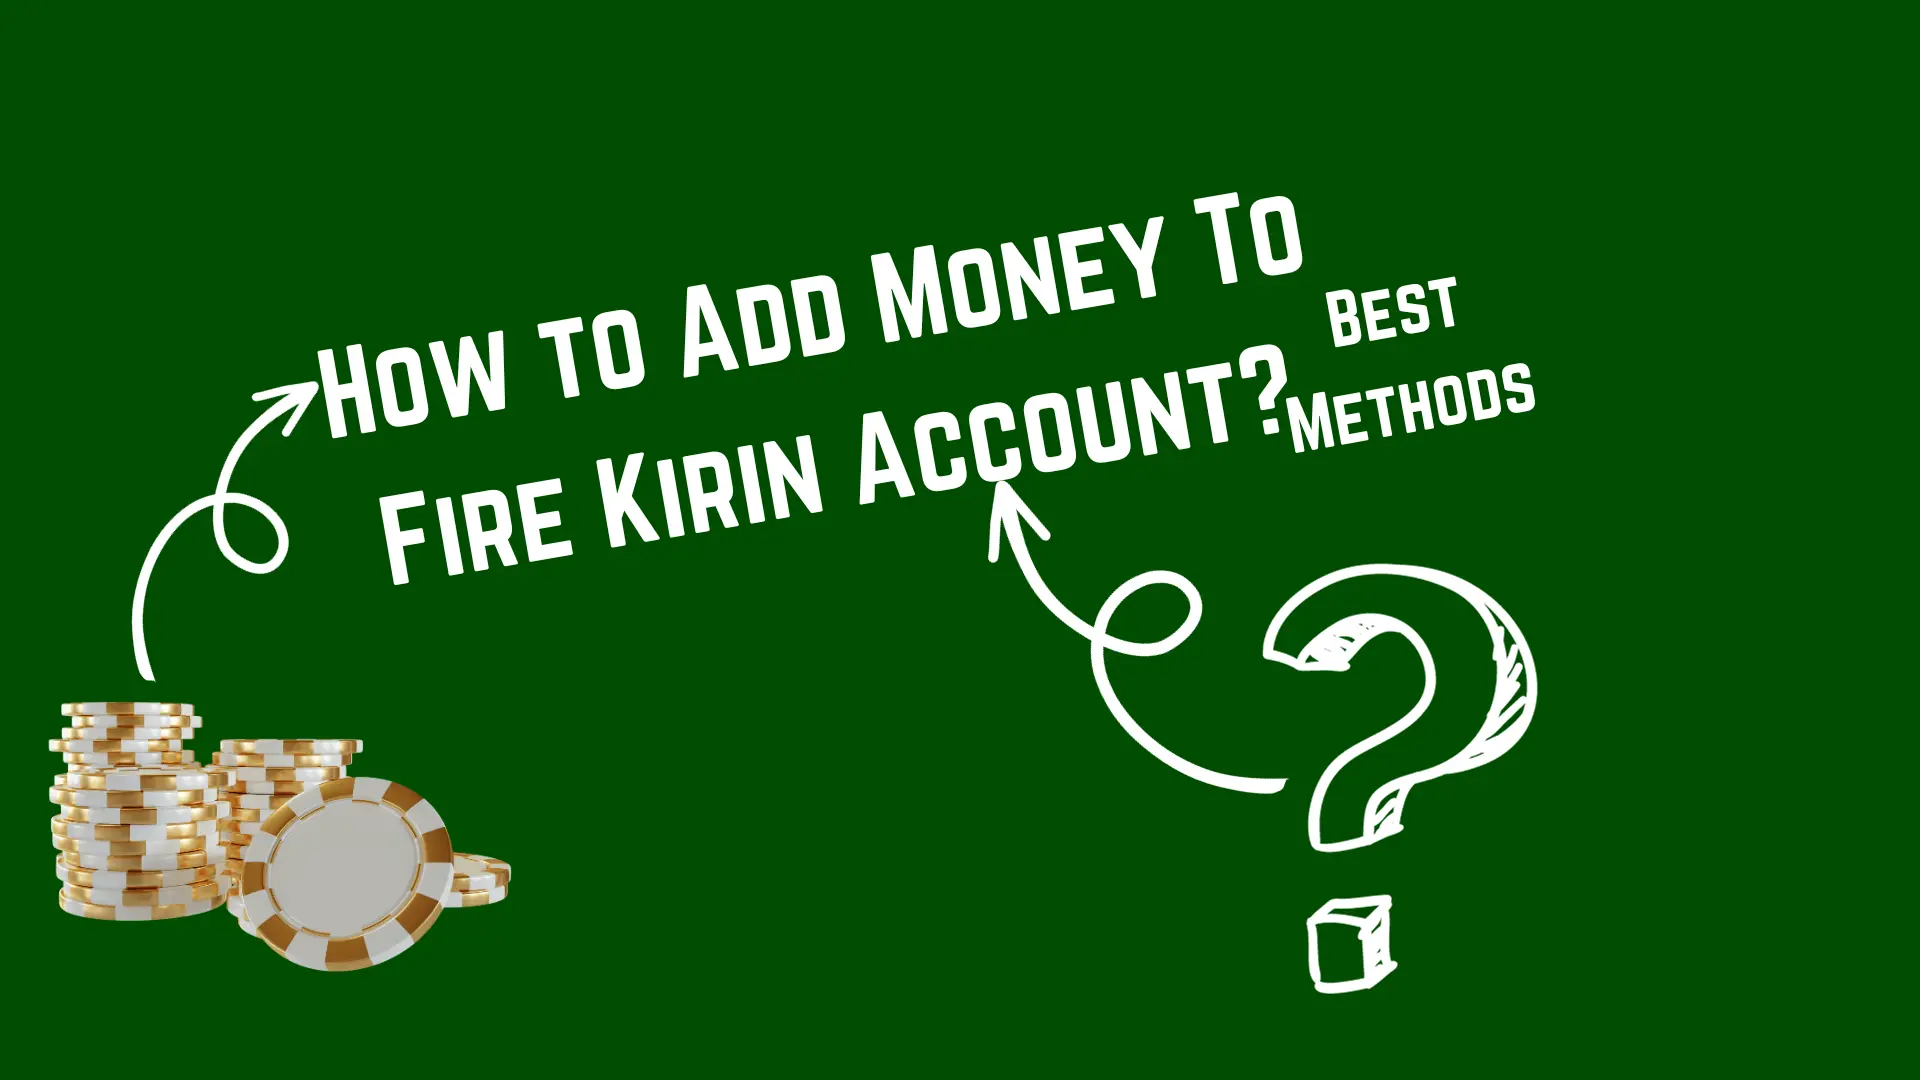 How to Add Money To Fire Kirin Account